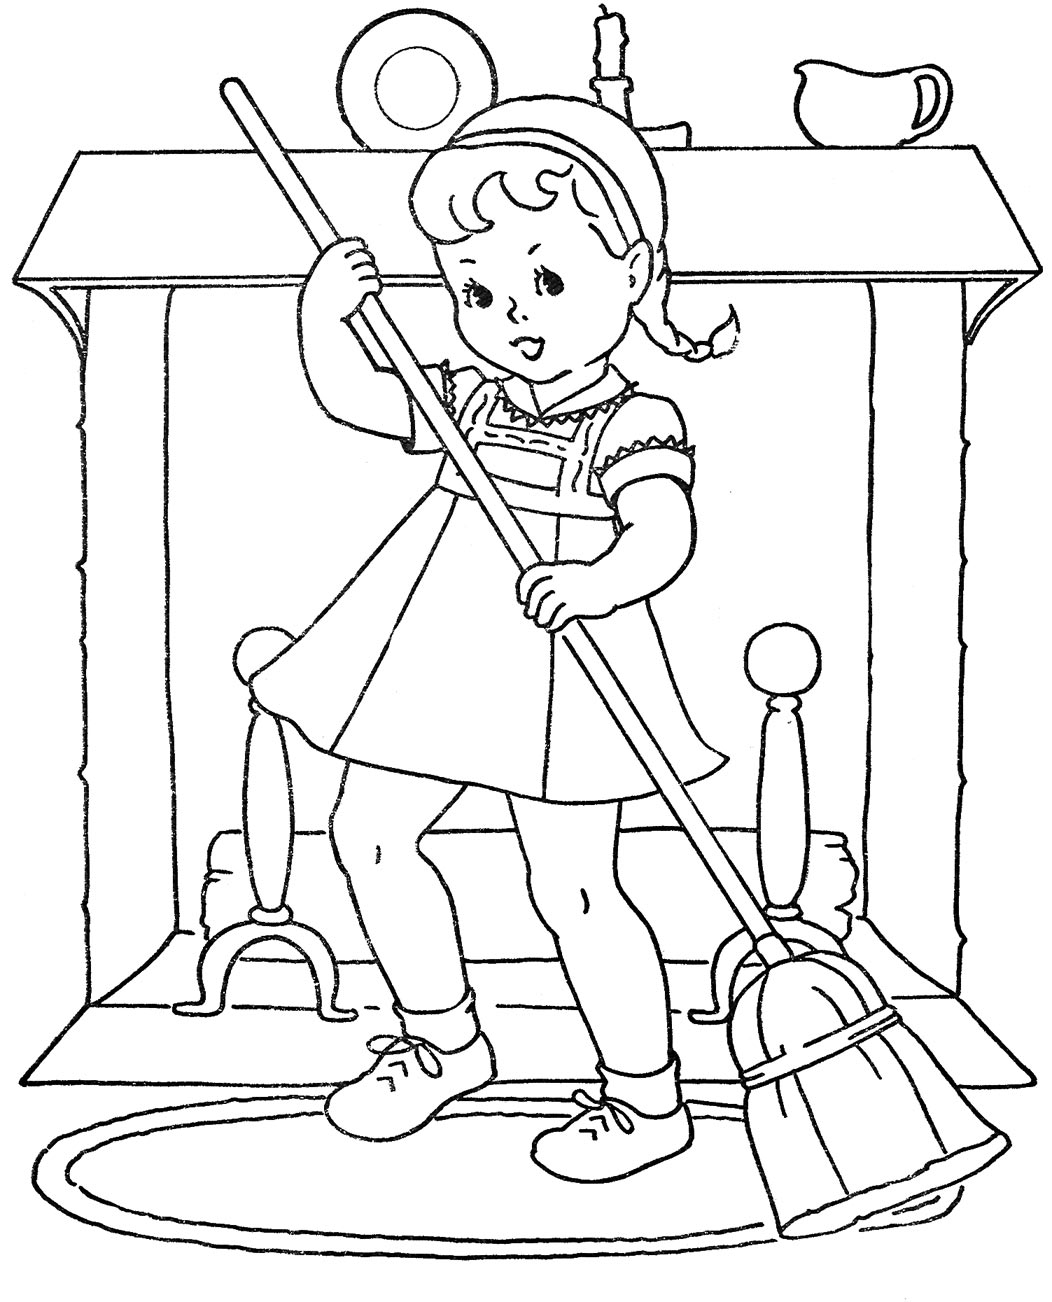 4570book Child Sweeping The Floor Clipart Black In Pack 4798